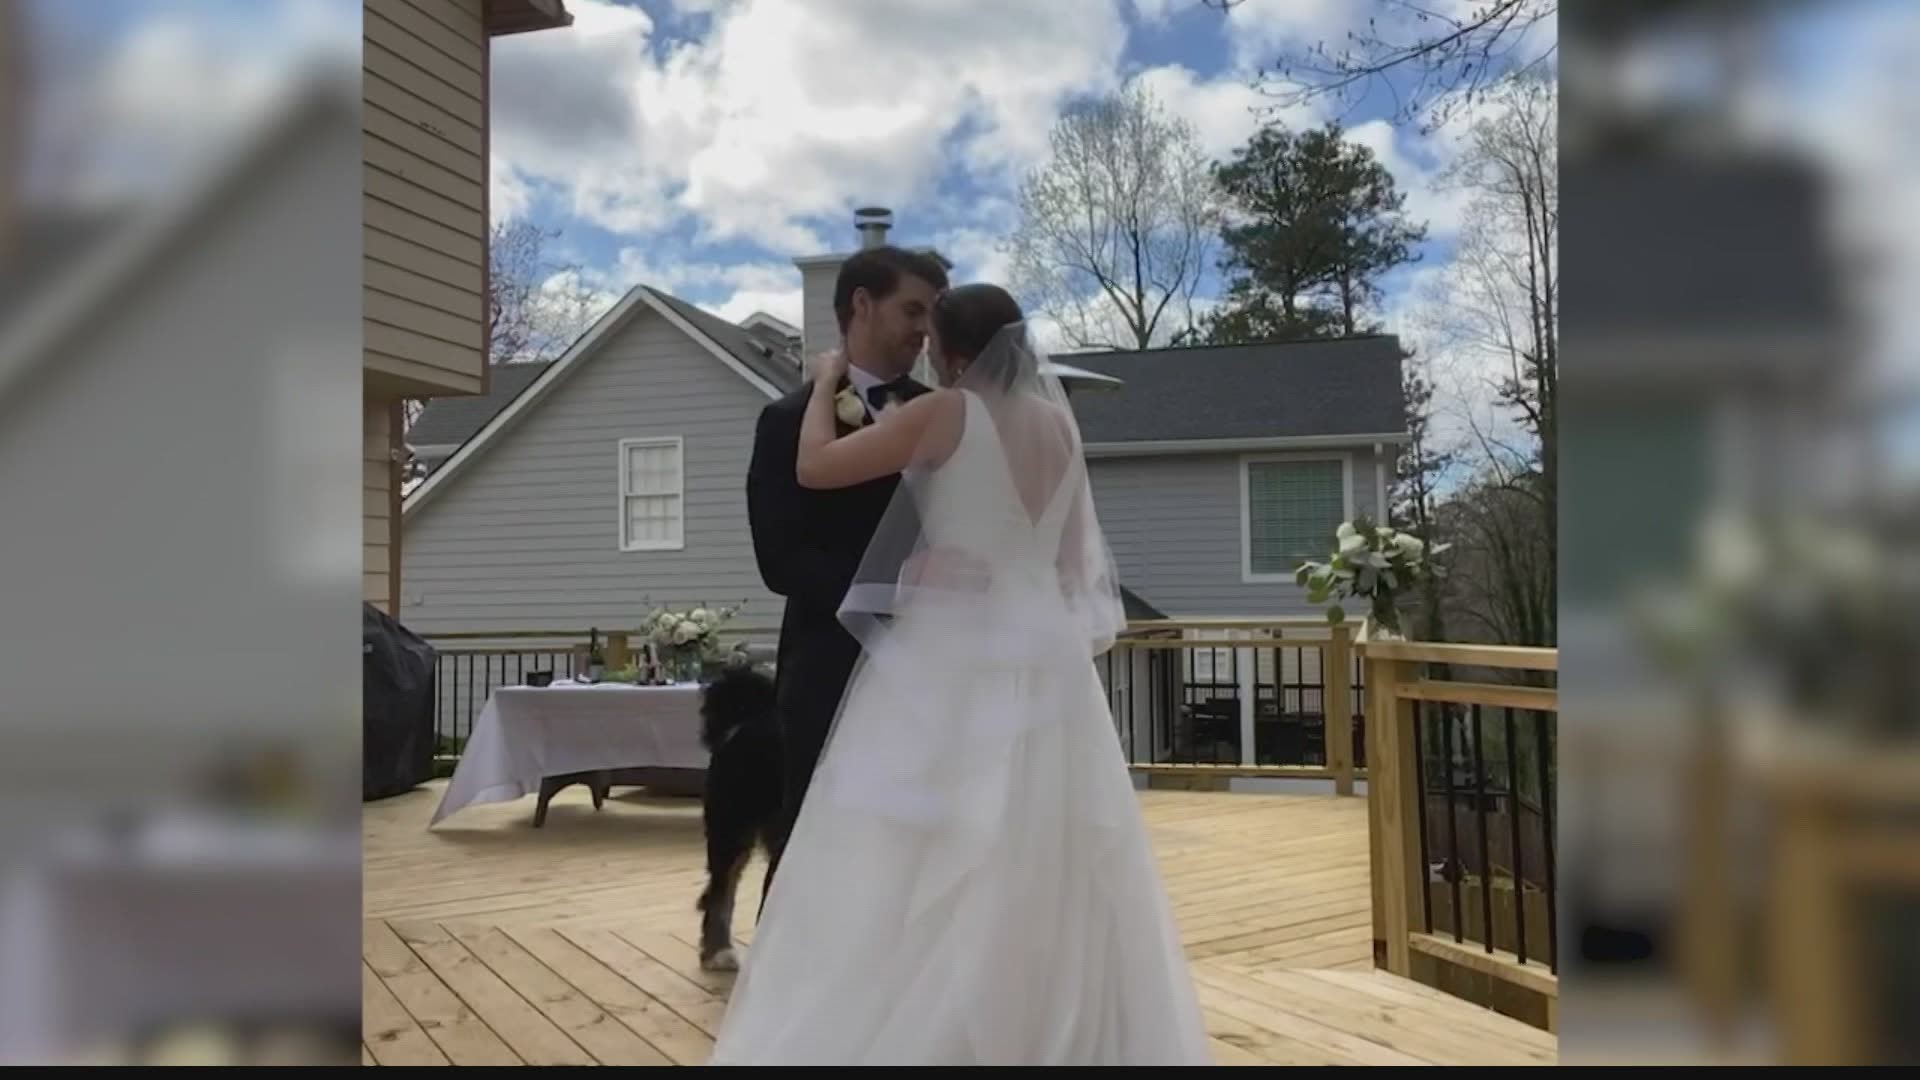 Some couples are getting creative, choosing to exchange vows digitally.